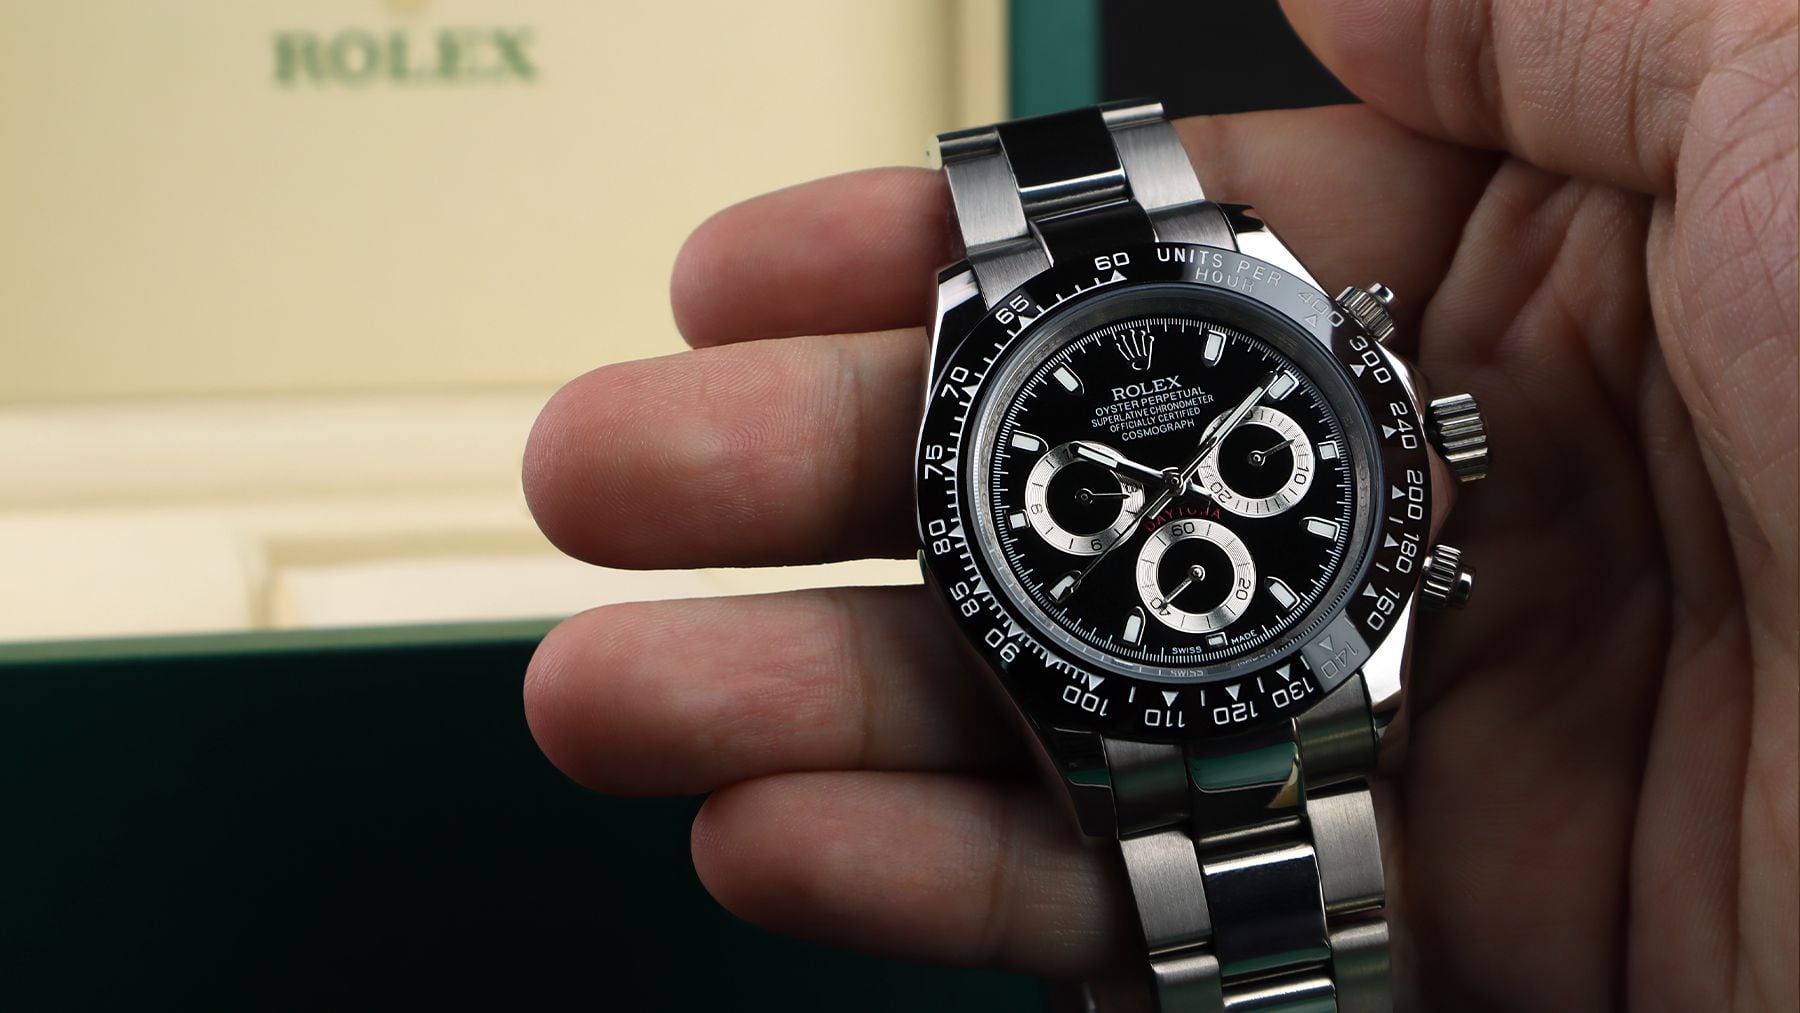 Only Two Used Rolex Models Rise in Value in a Year of Falling Watch Prices